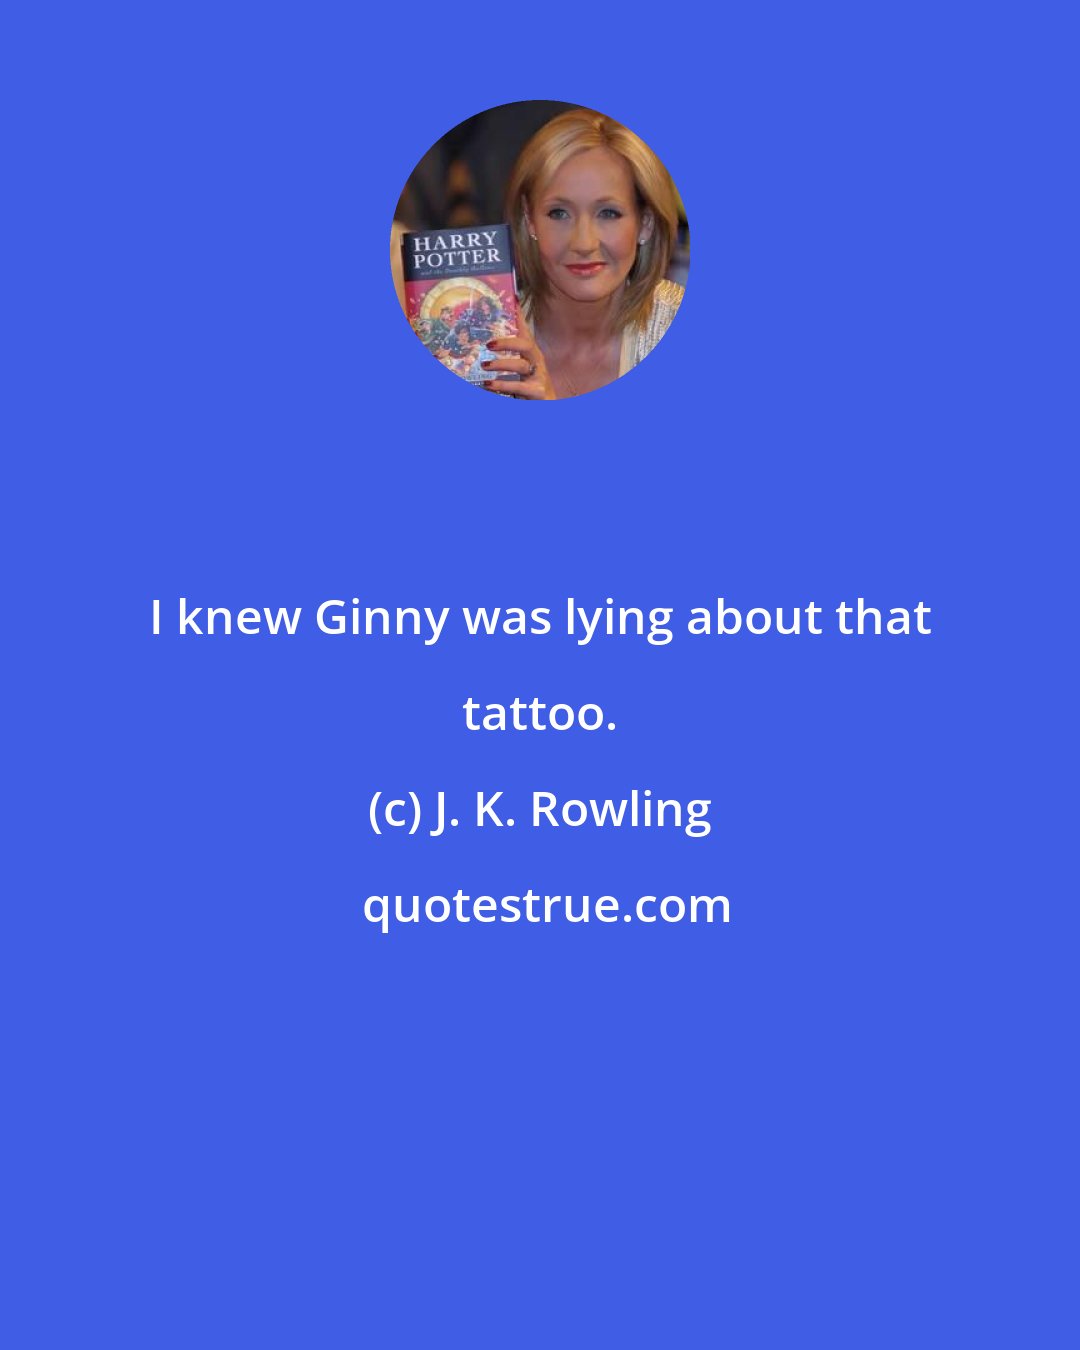 J. K. Rowling: I knew Ginny was lying about that tattoo.